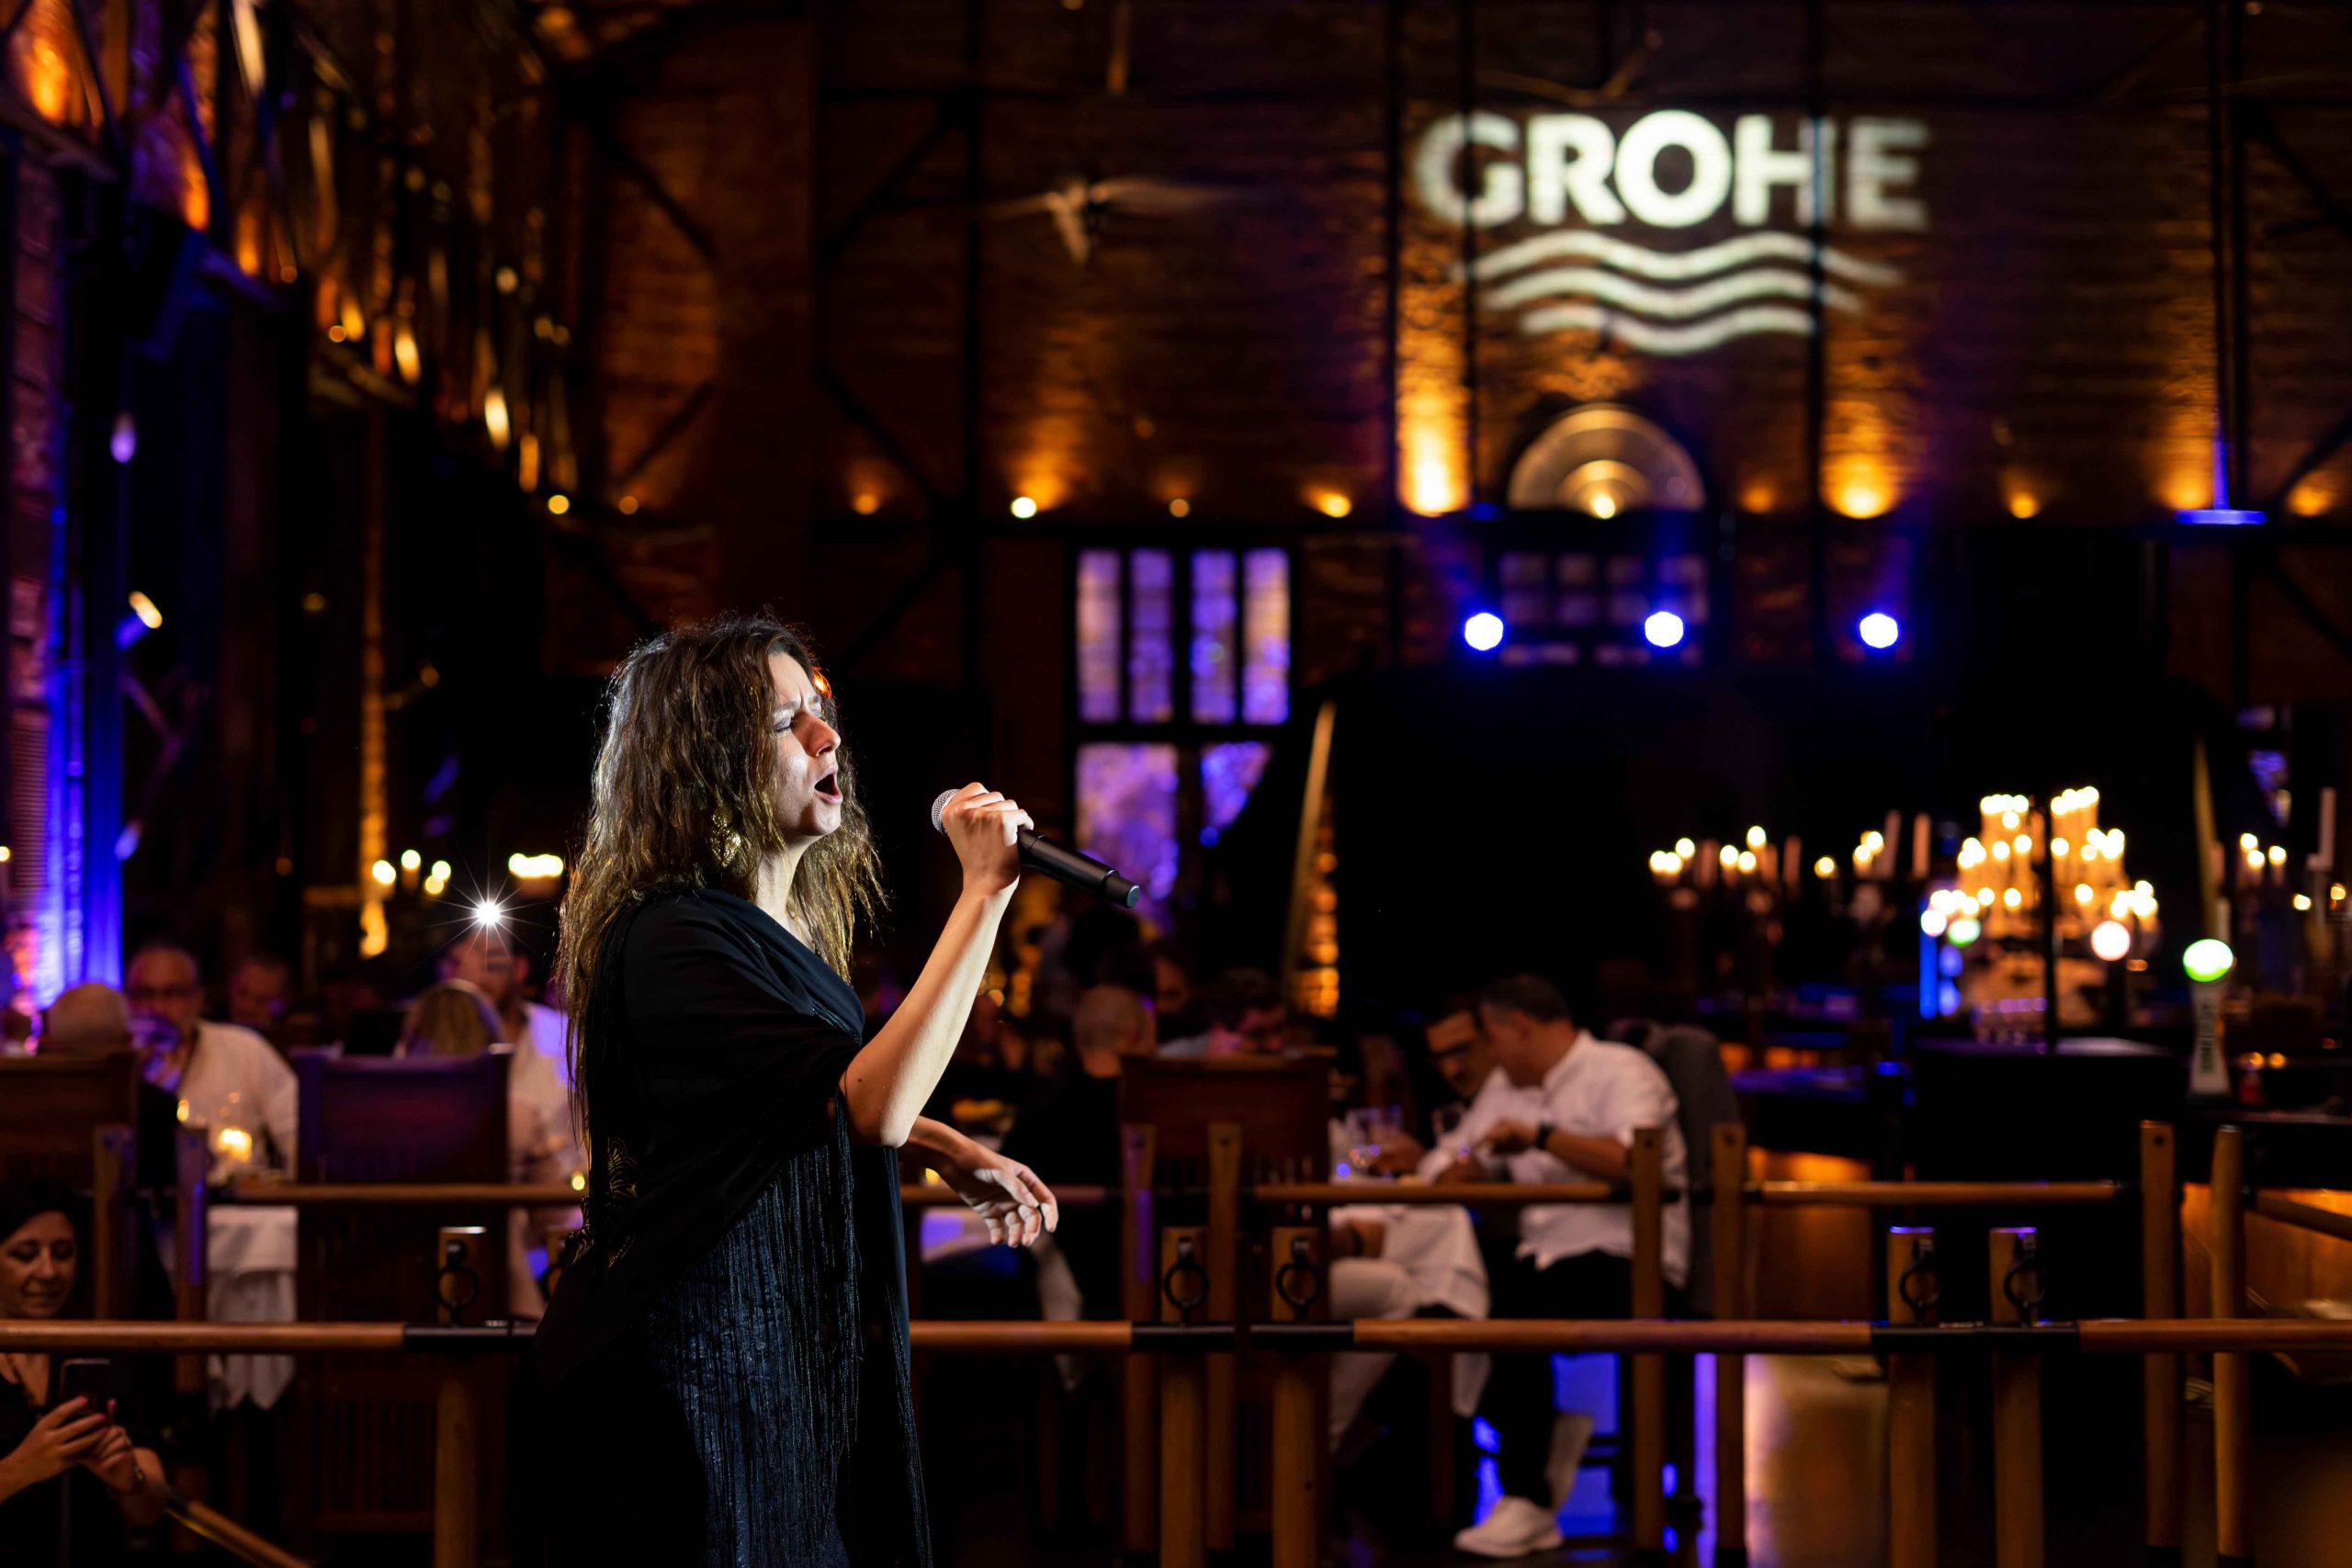 Singer performing and people dining